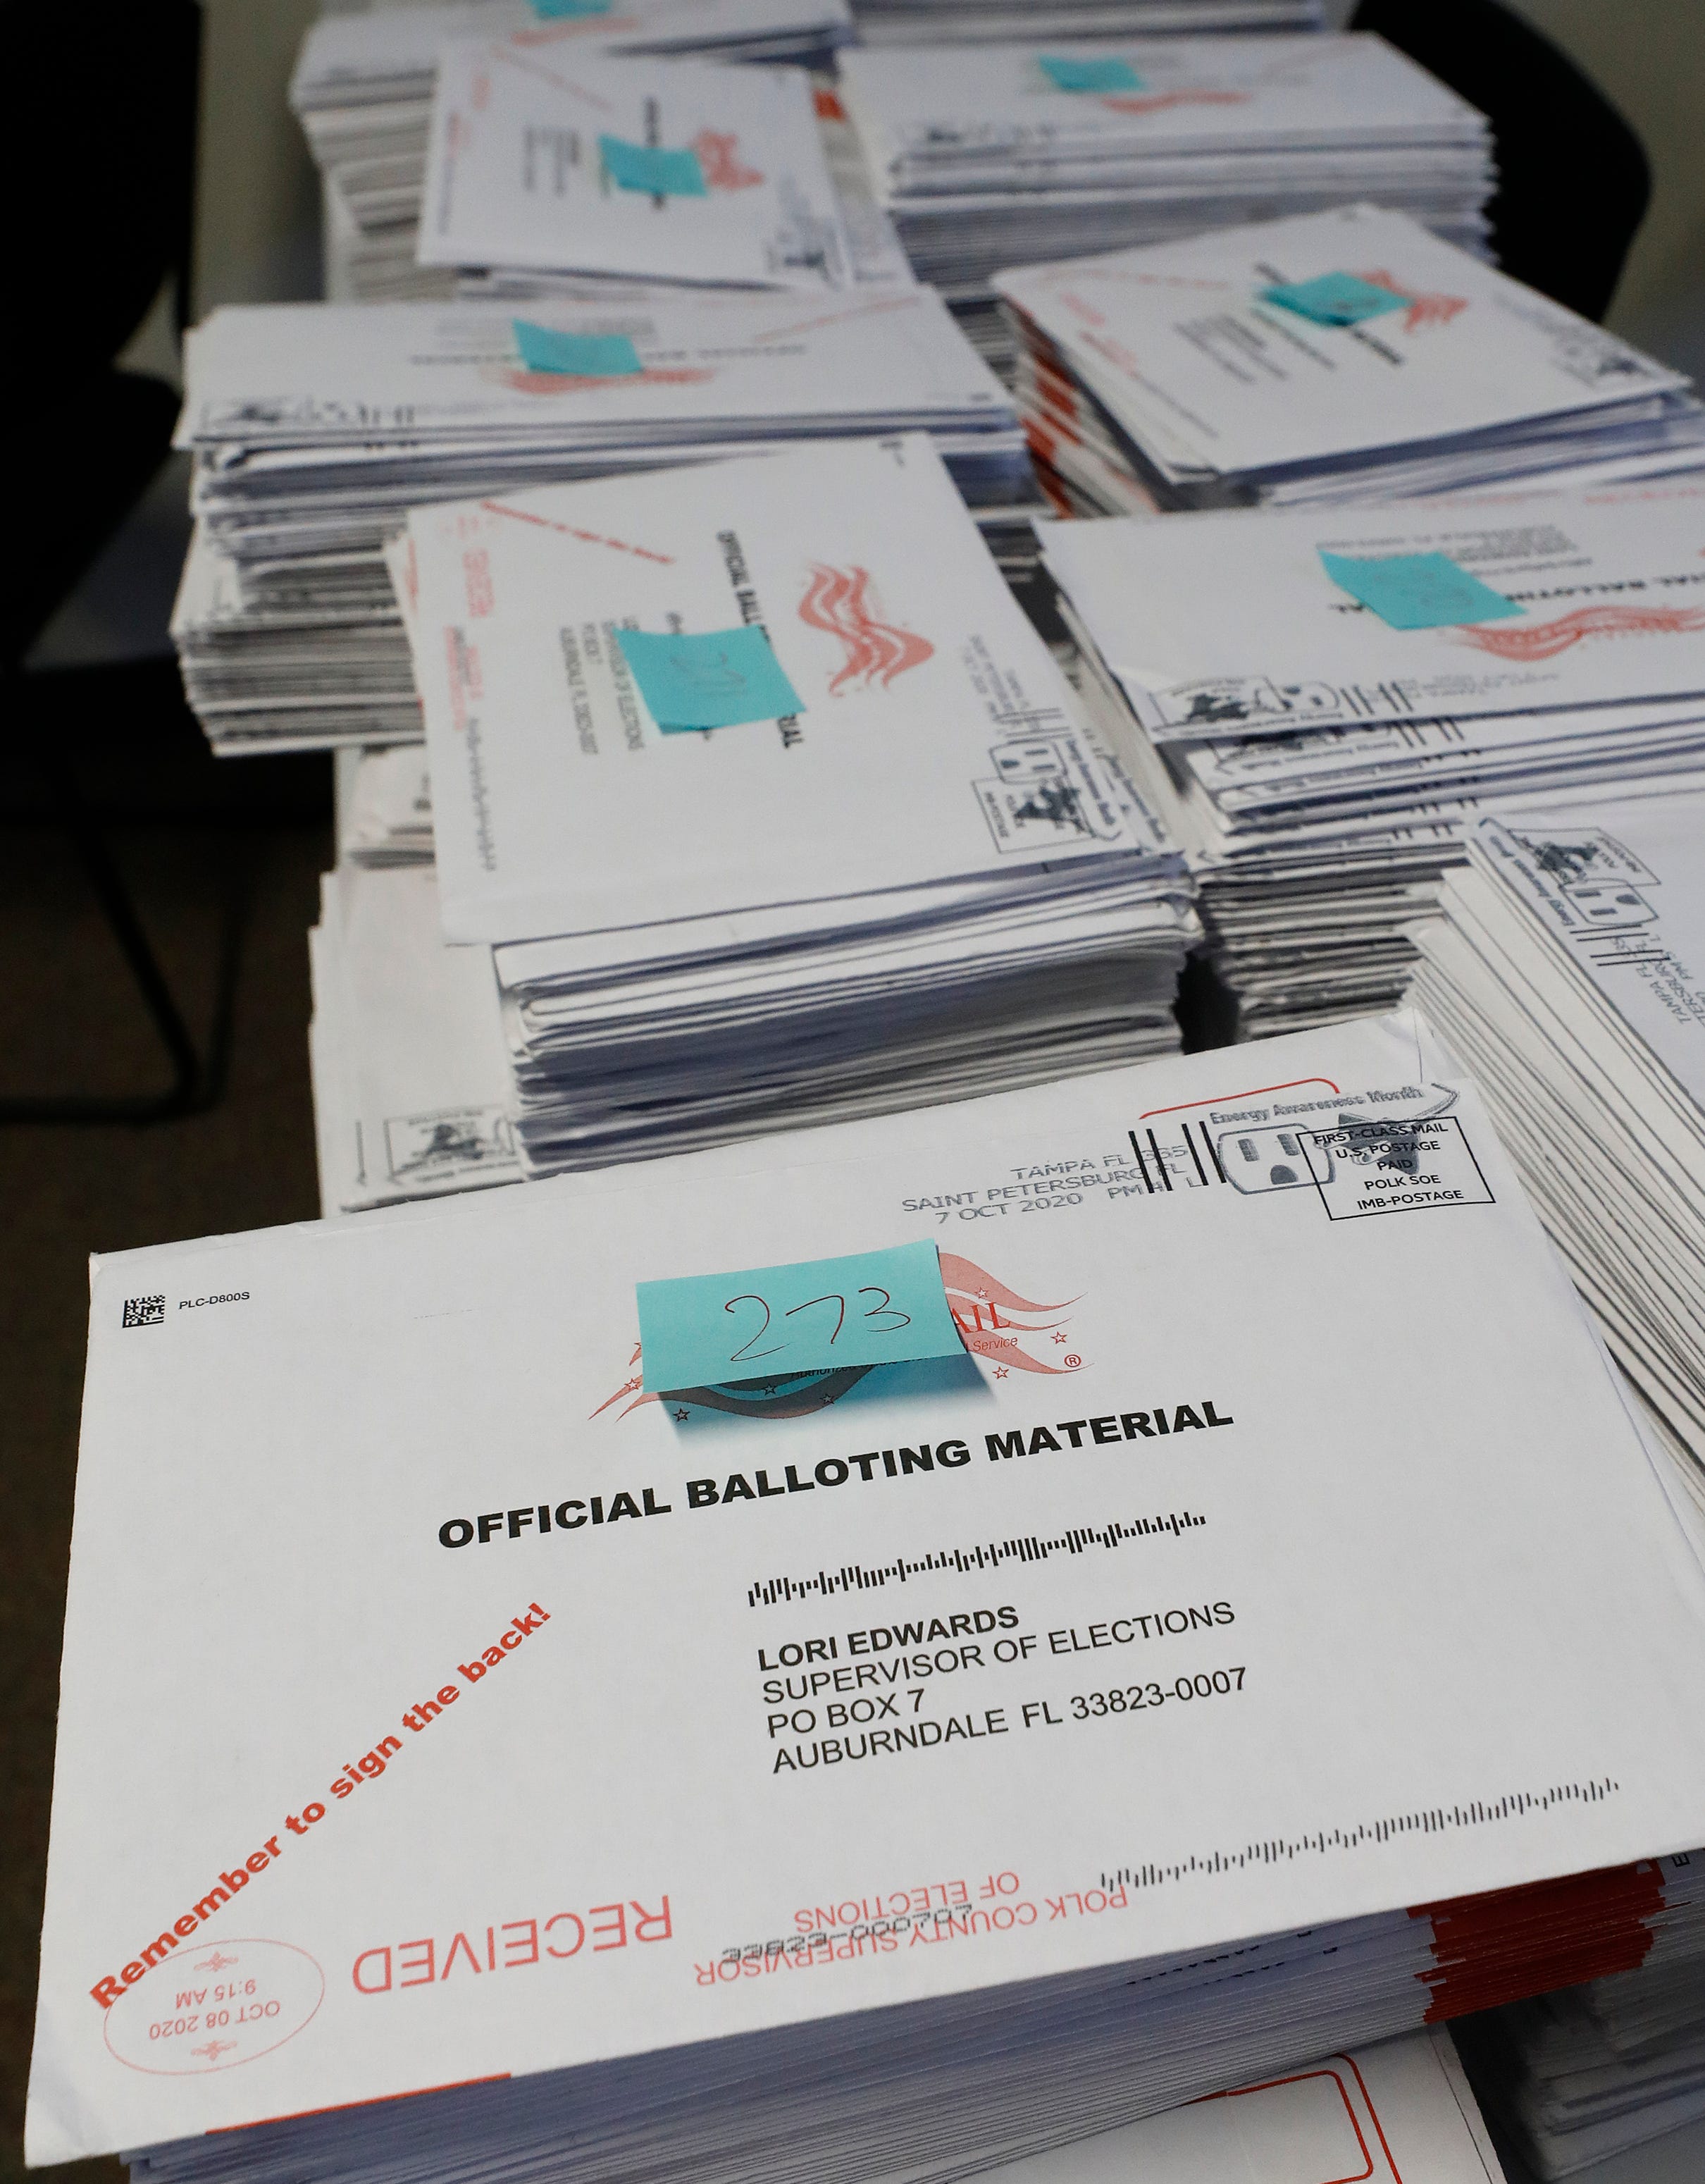 Three weeks before Election Day, the office has already mailed more than 150,000 ballots to voters, and the deadline to request them isn’t until Oct. 24.